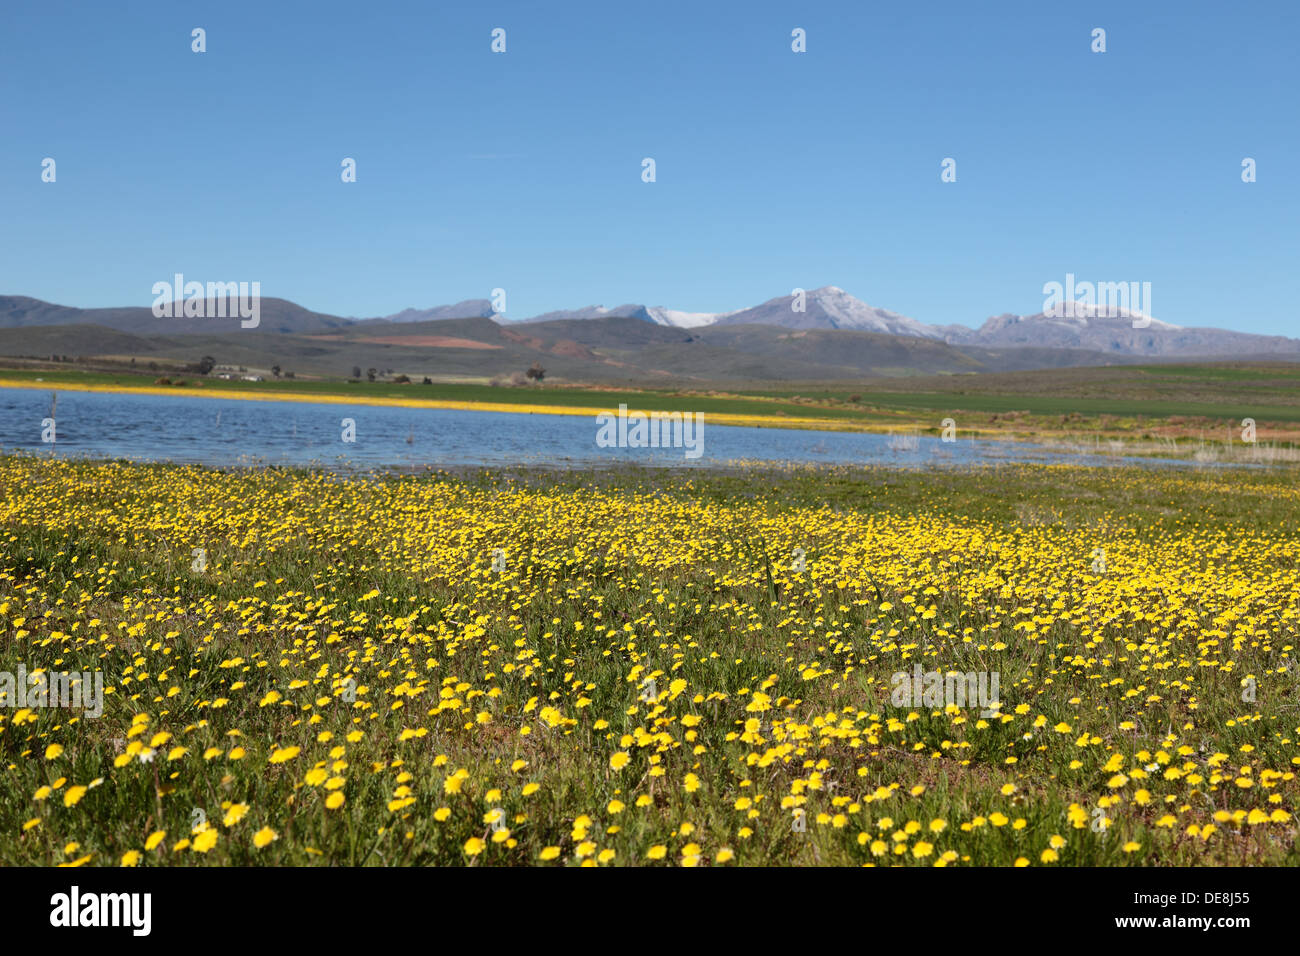 Spring flowers and seasonal lake with snow capped peaks of Matroosberg mountains in the background Stock Photo